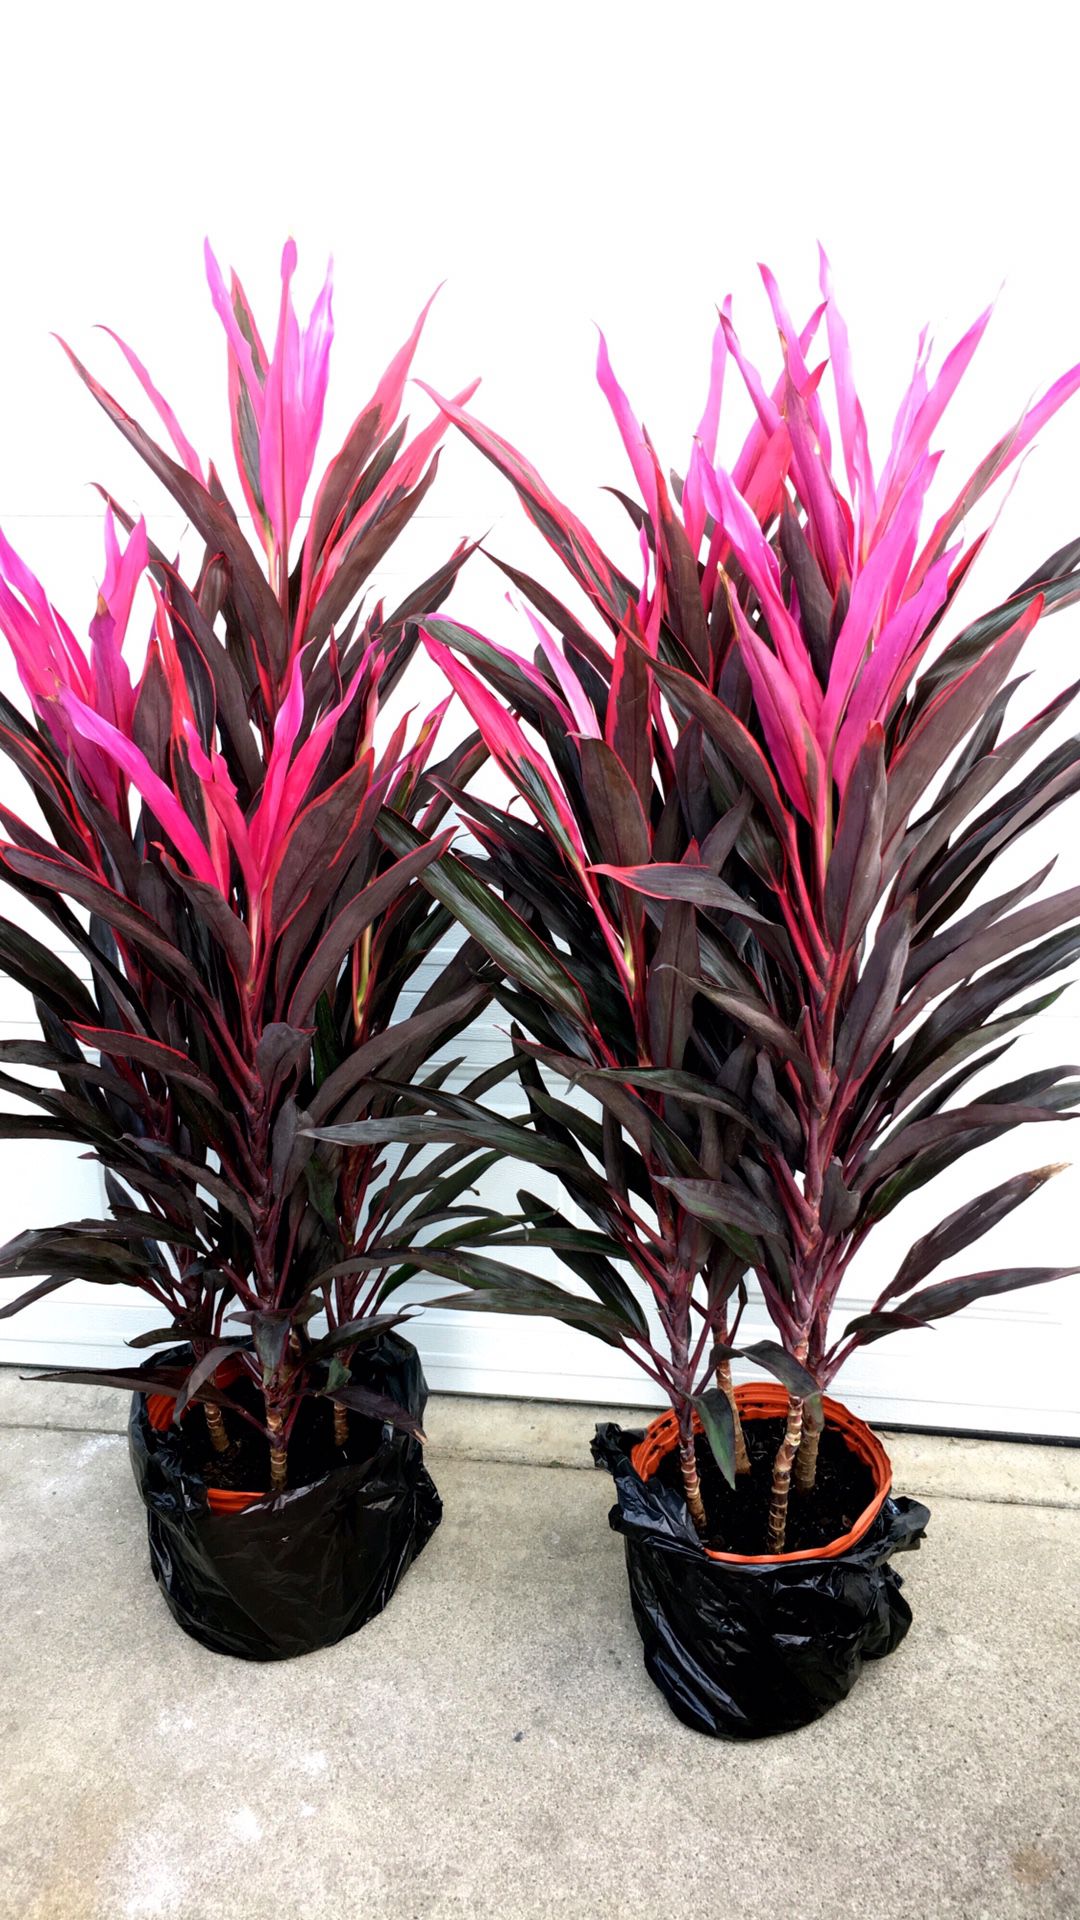 HAWAIIAN TI - Cordyline Terminalis - 4 feet tall total - Outdoor and Shaded Plant - $20 each - Available 1